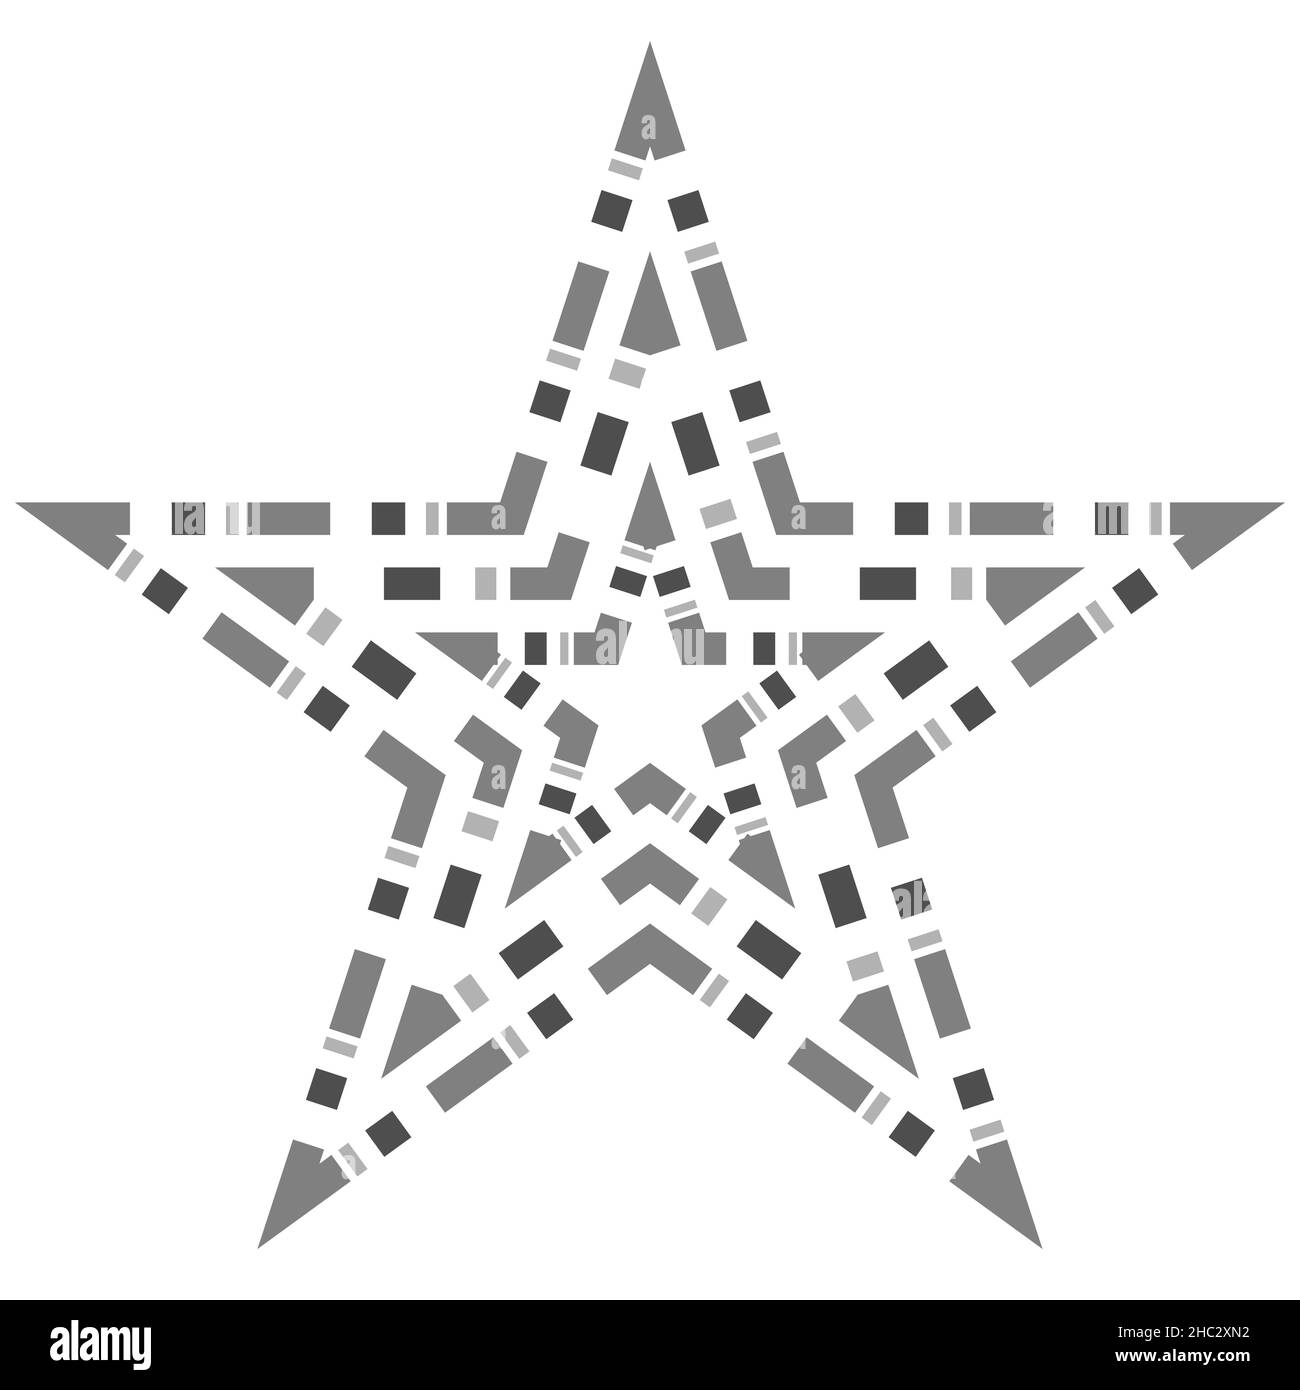 Five point star shape - sign symbol icon decomposed - vector illustration Stock Vector